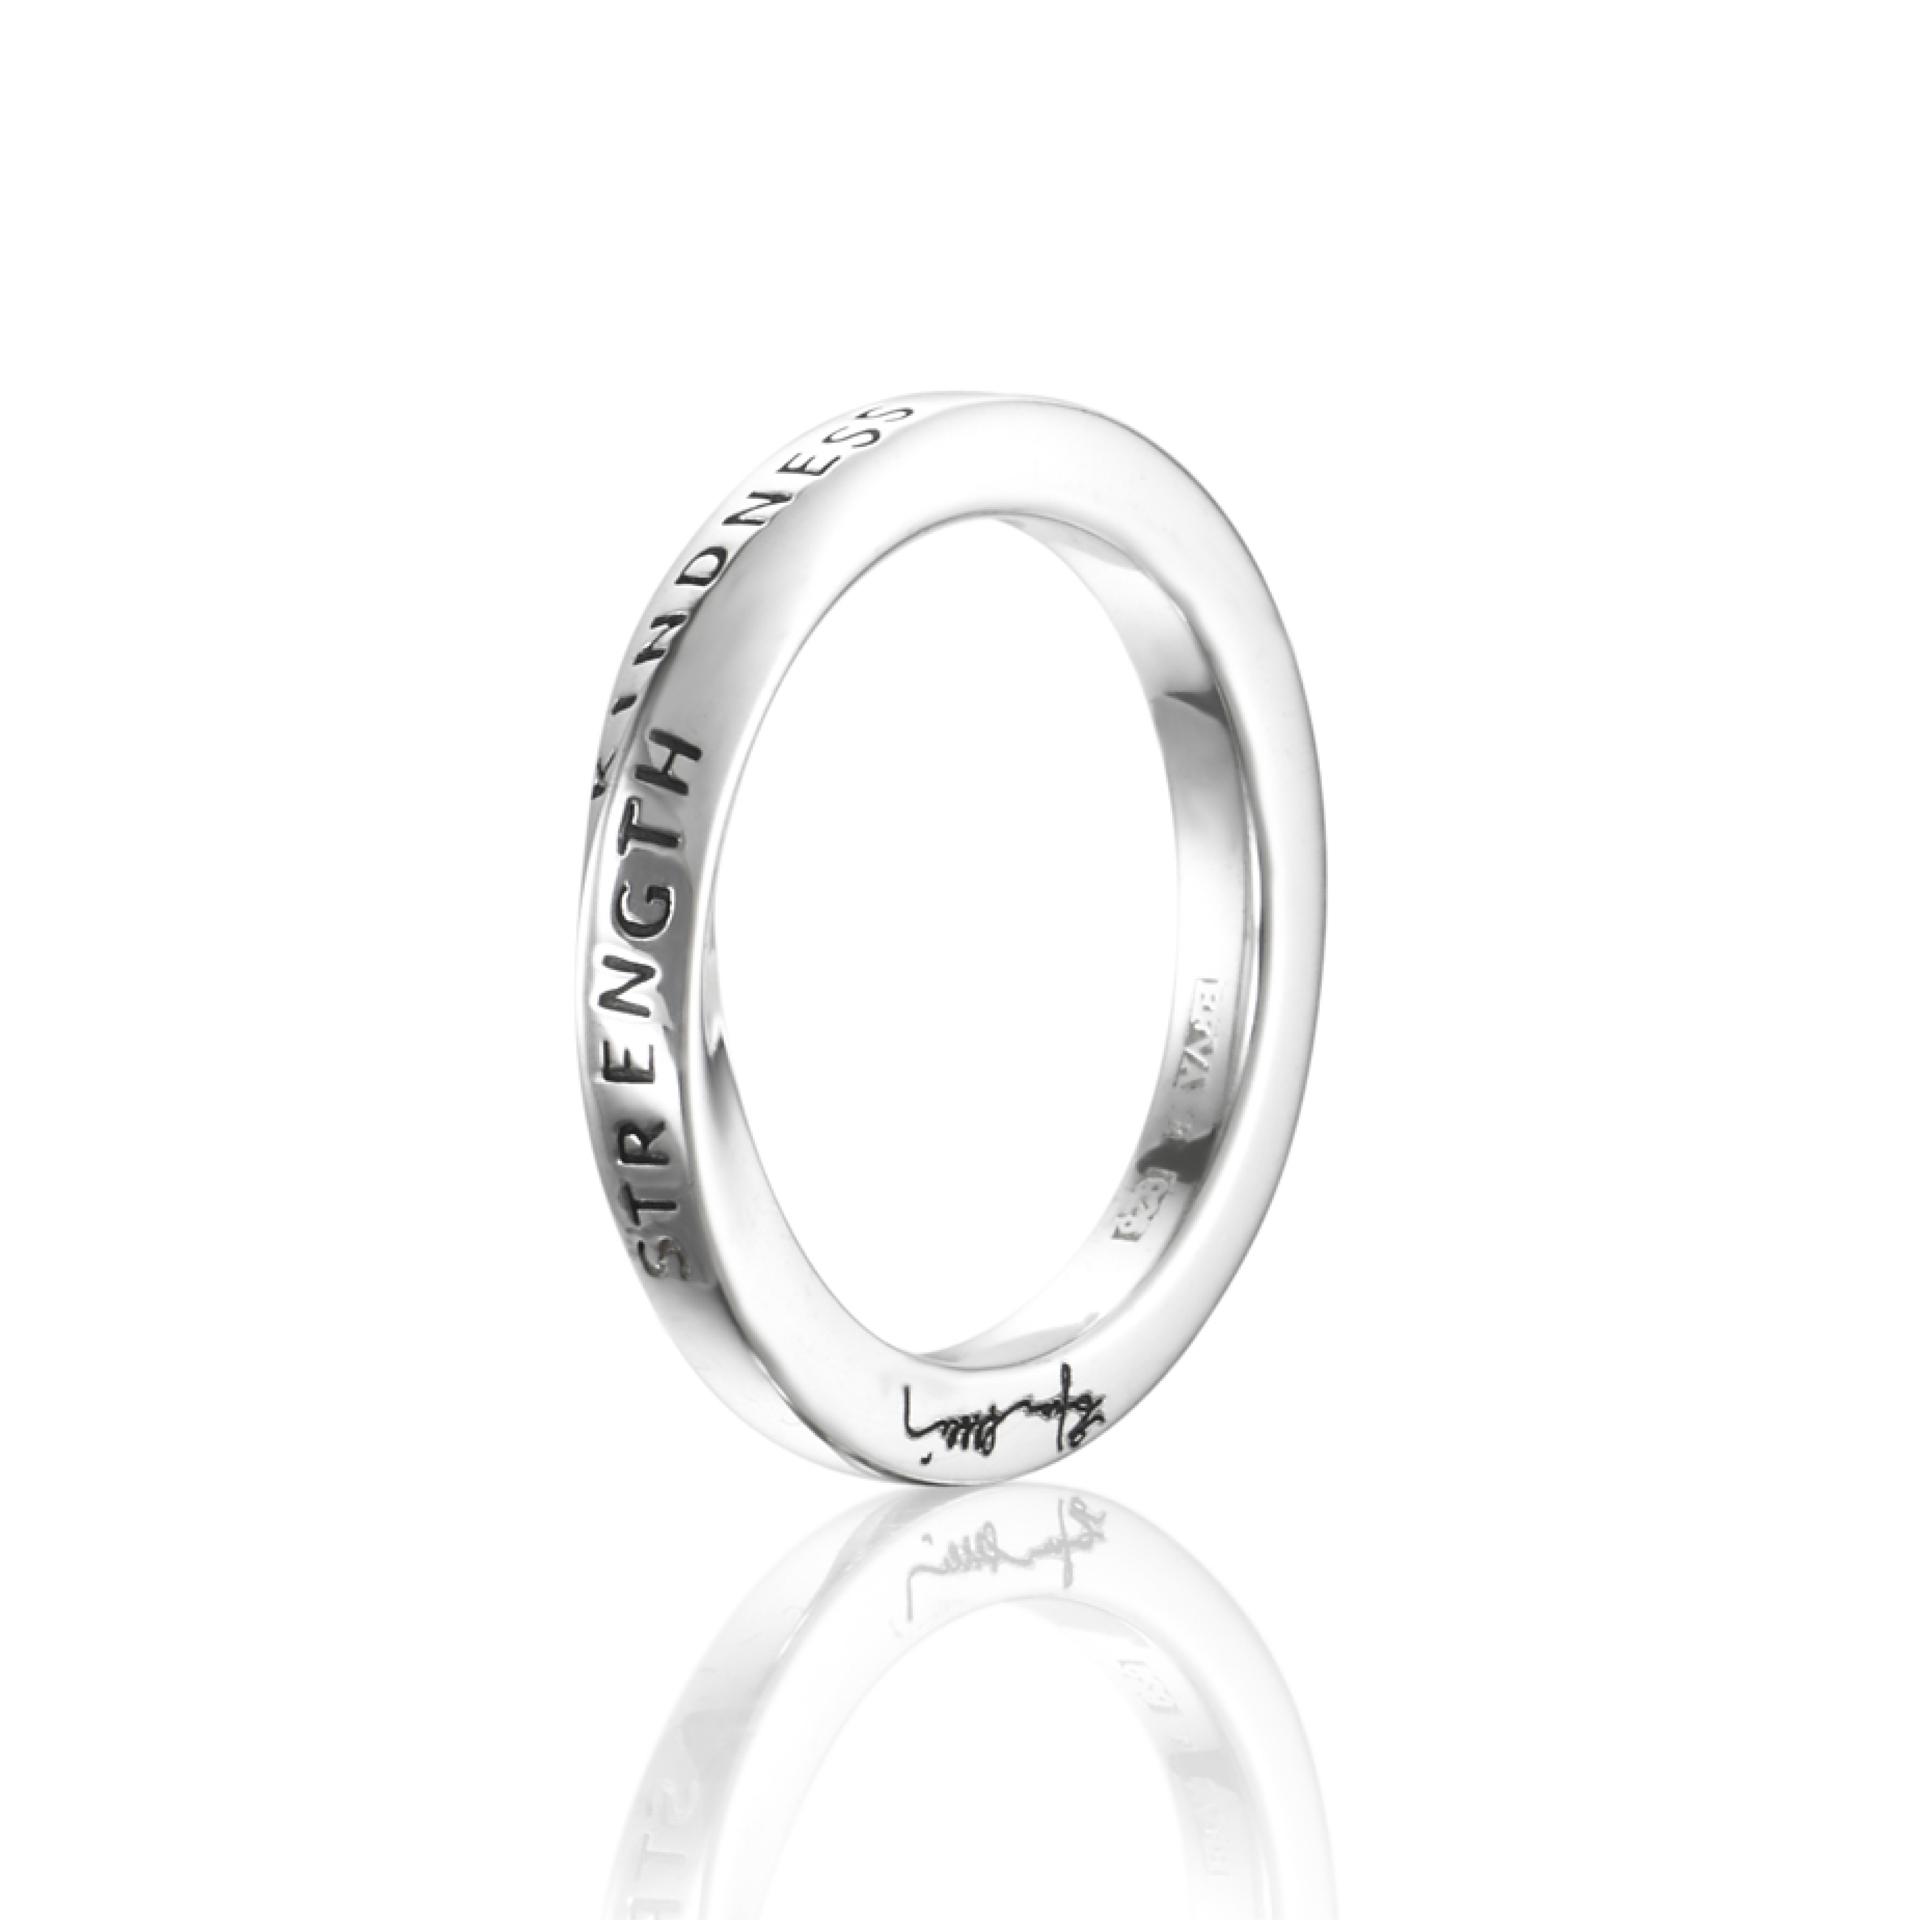 STRENGTH & KINDNESS RING